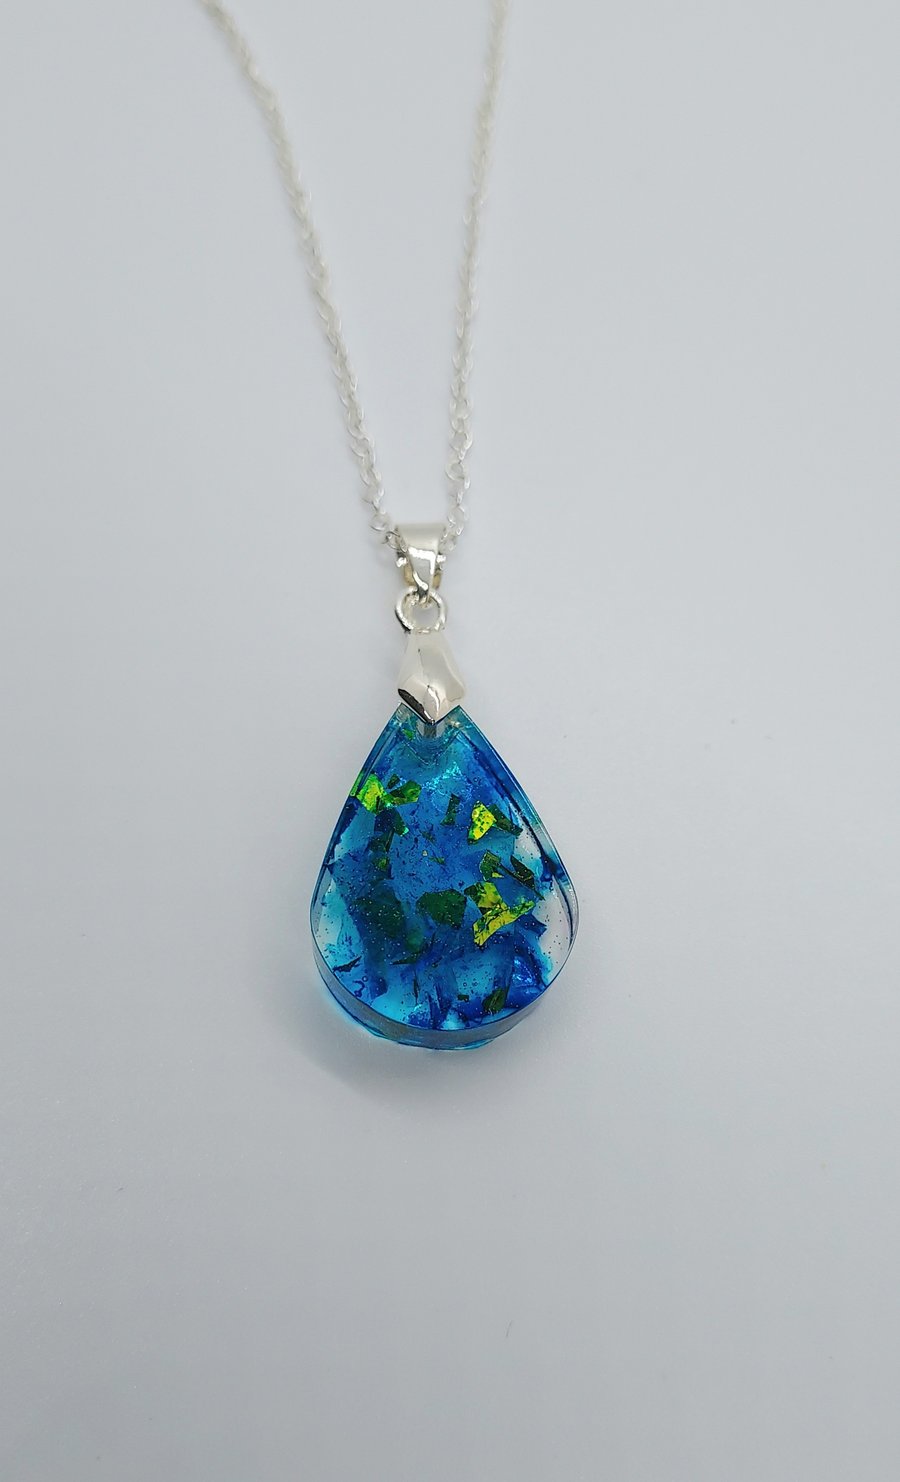 Blue resin teardrop pendant necklace on an 18" silverplated chain